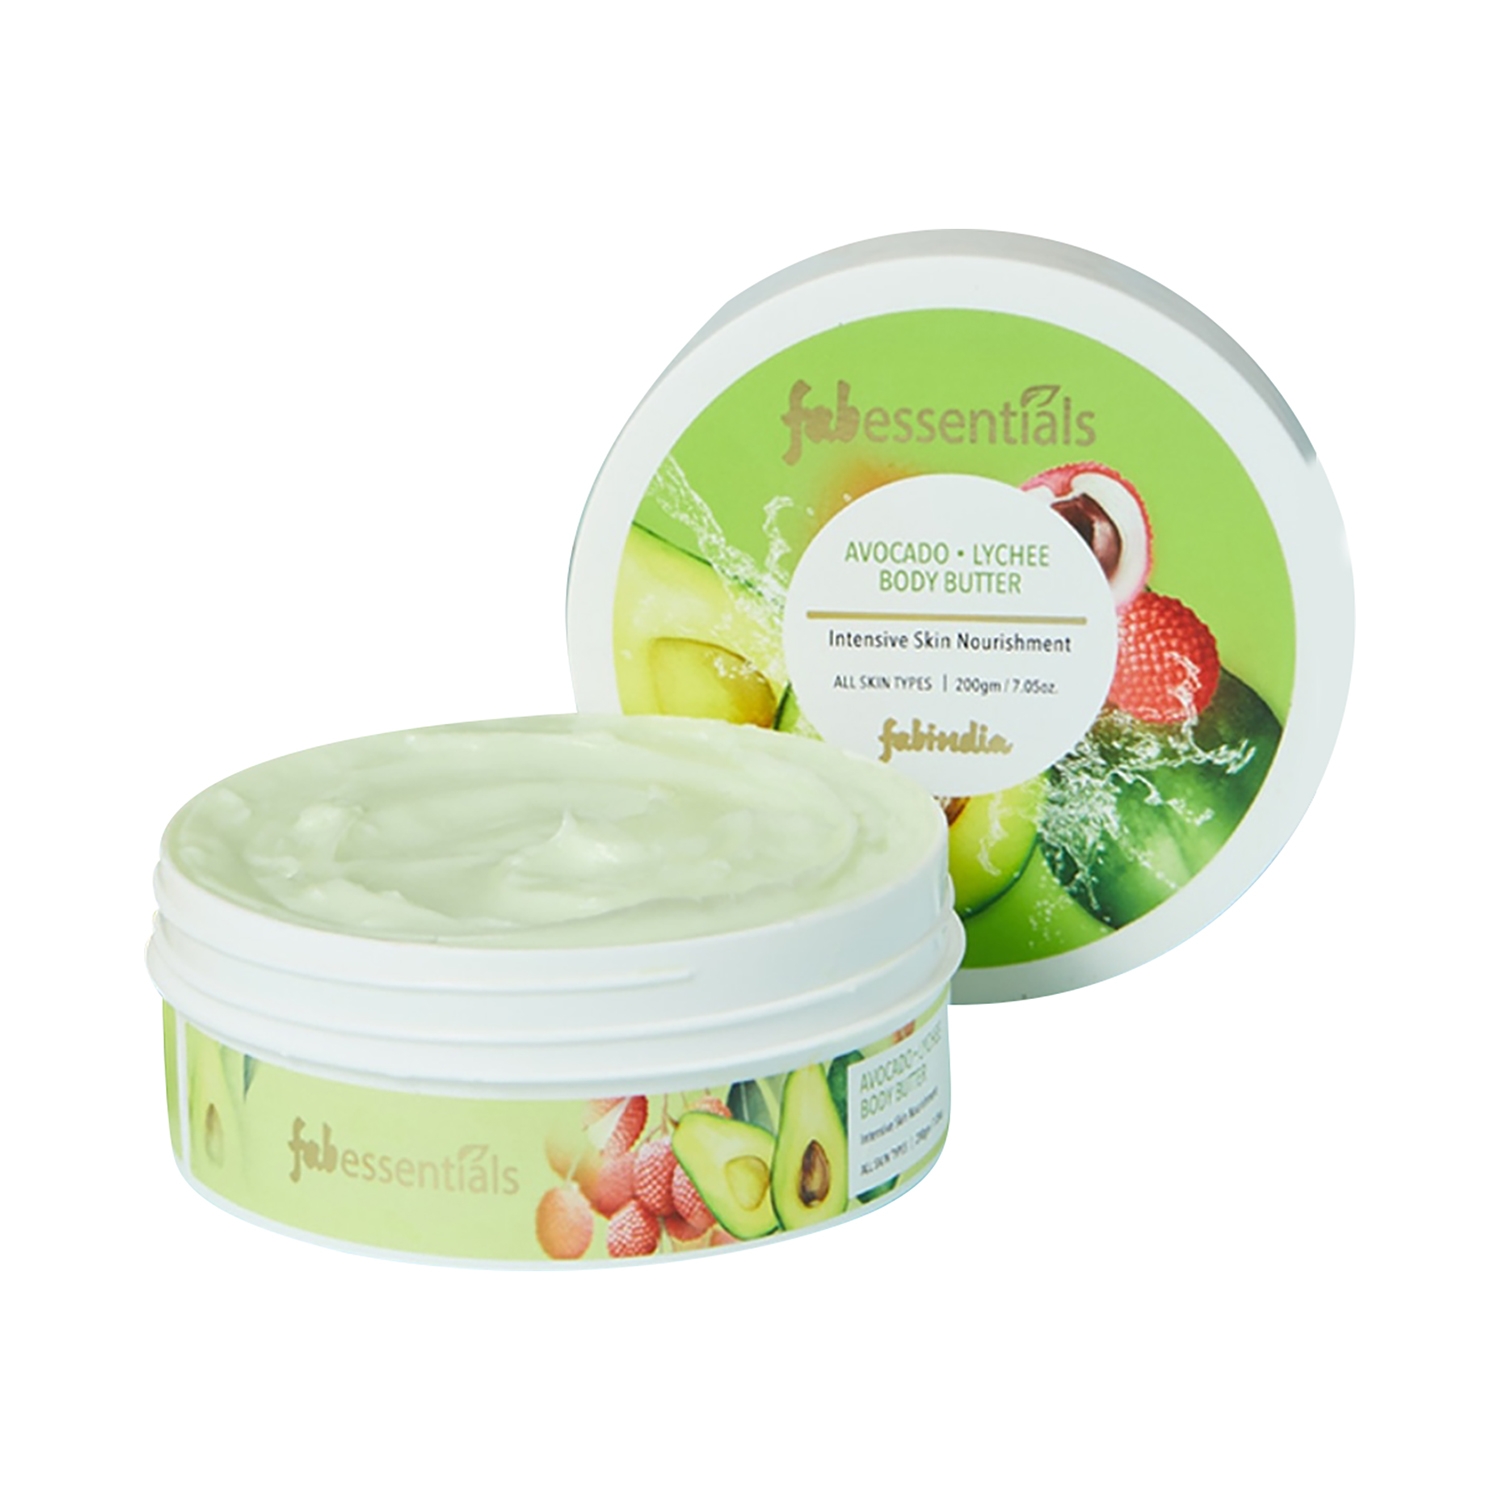 Fabessentials by Fabindia | Fabessentials by Fabindia Avocado Lychee Body Butter (200g)